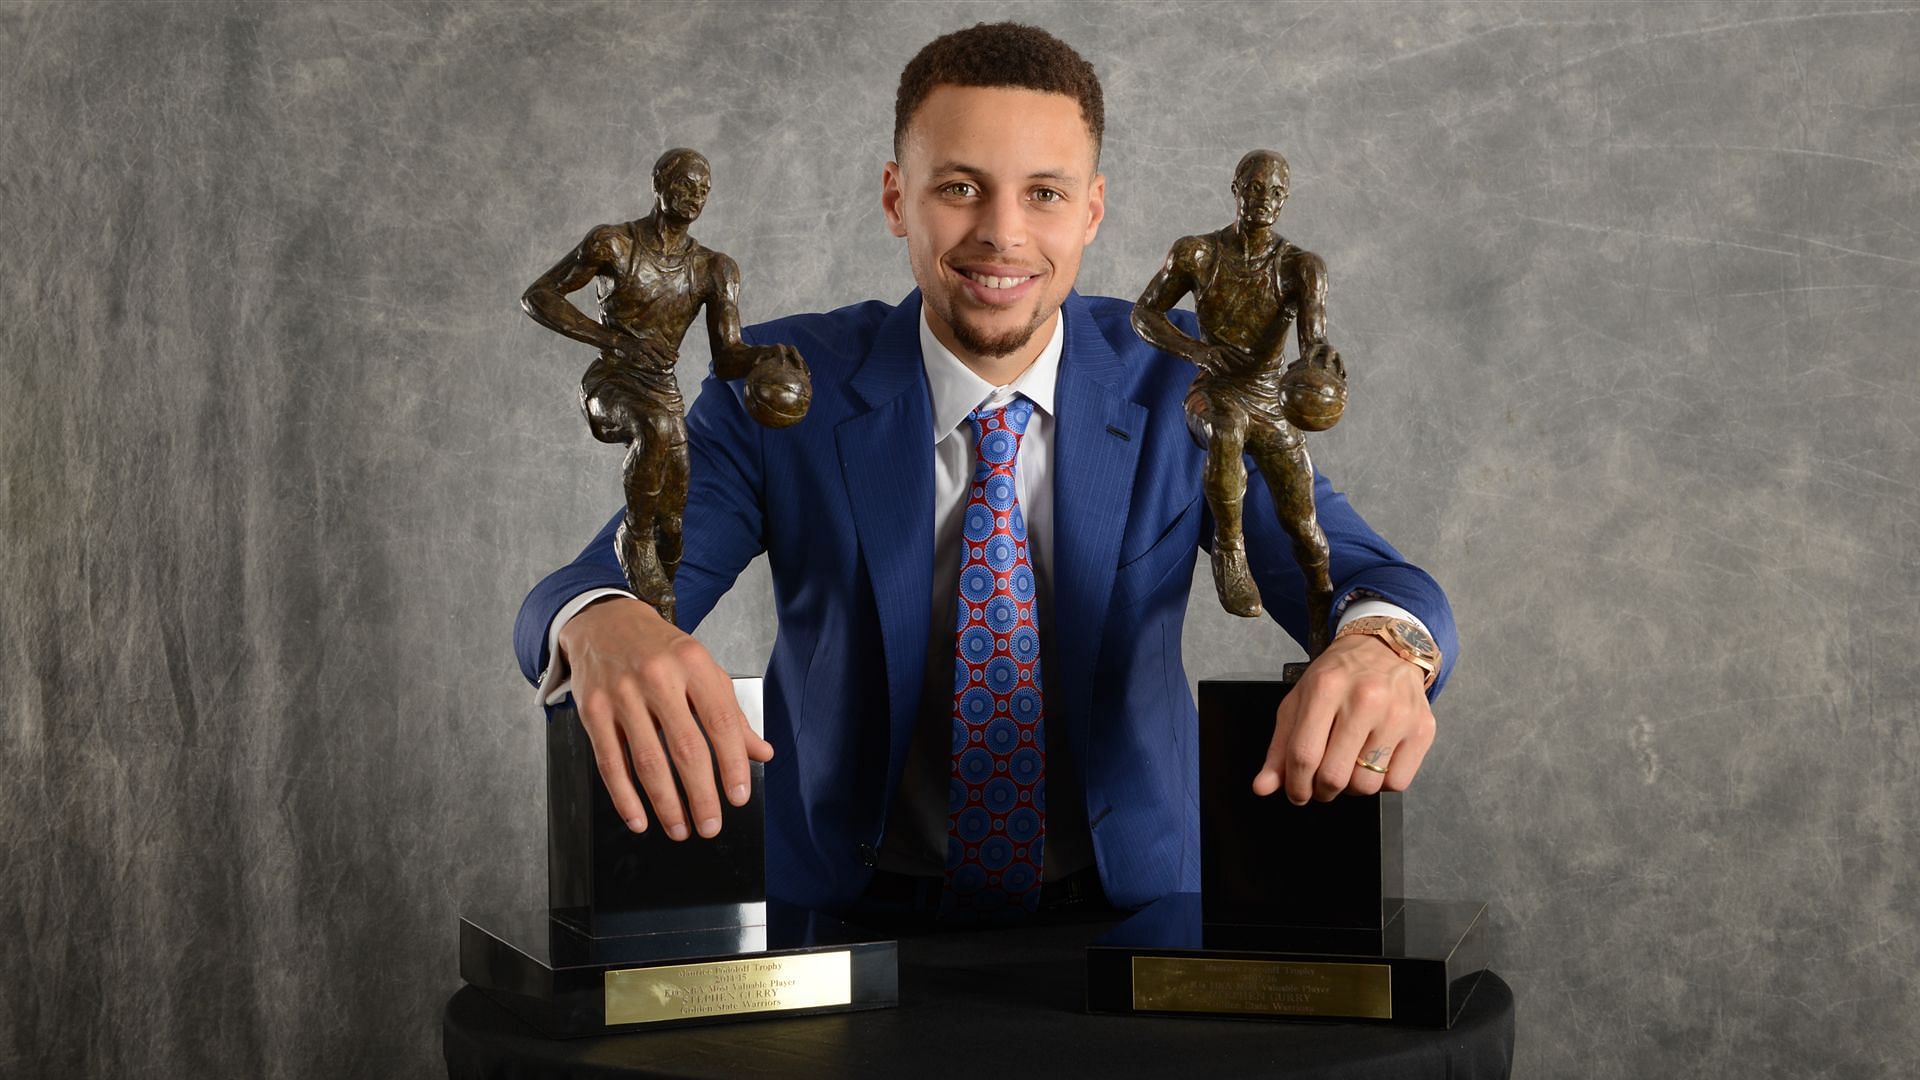 From hardly playing in crucial moments, Curry would become a two-time MVP and changed the game with his shooting. [Photo: Sporting News]